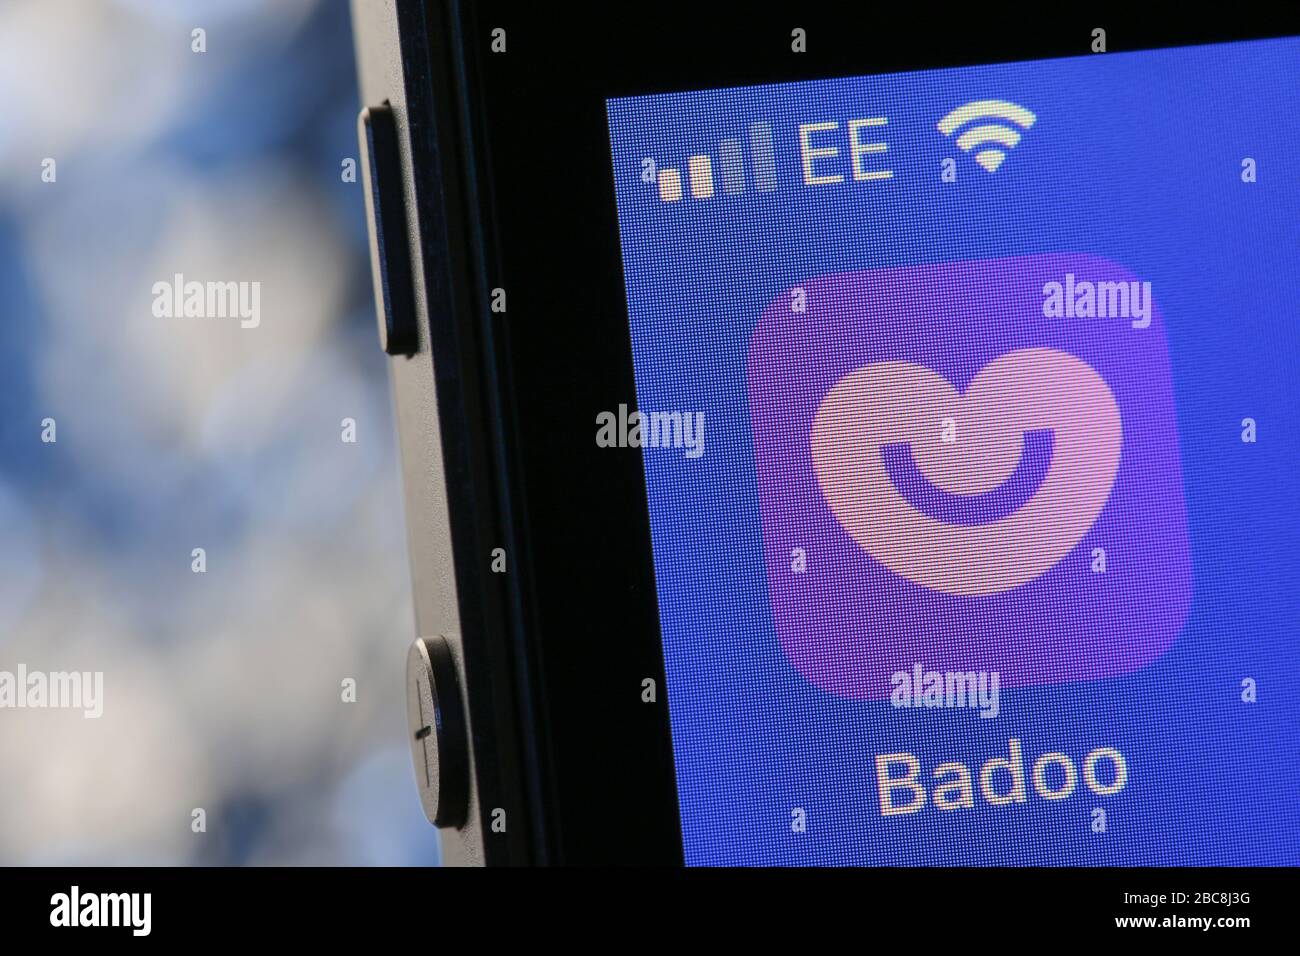 How to hack badoo private photos on iphone